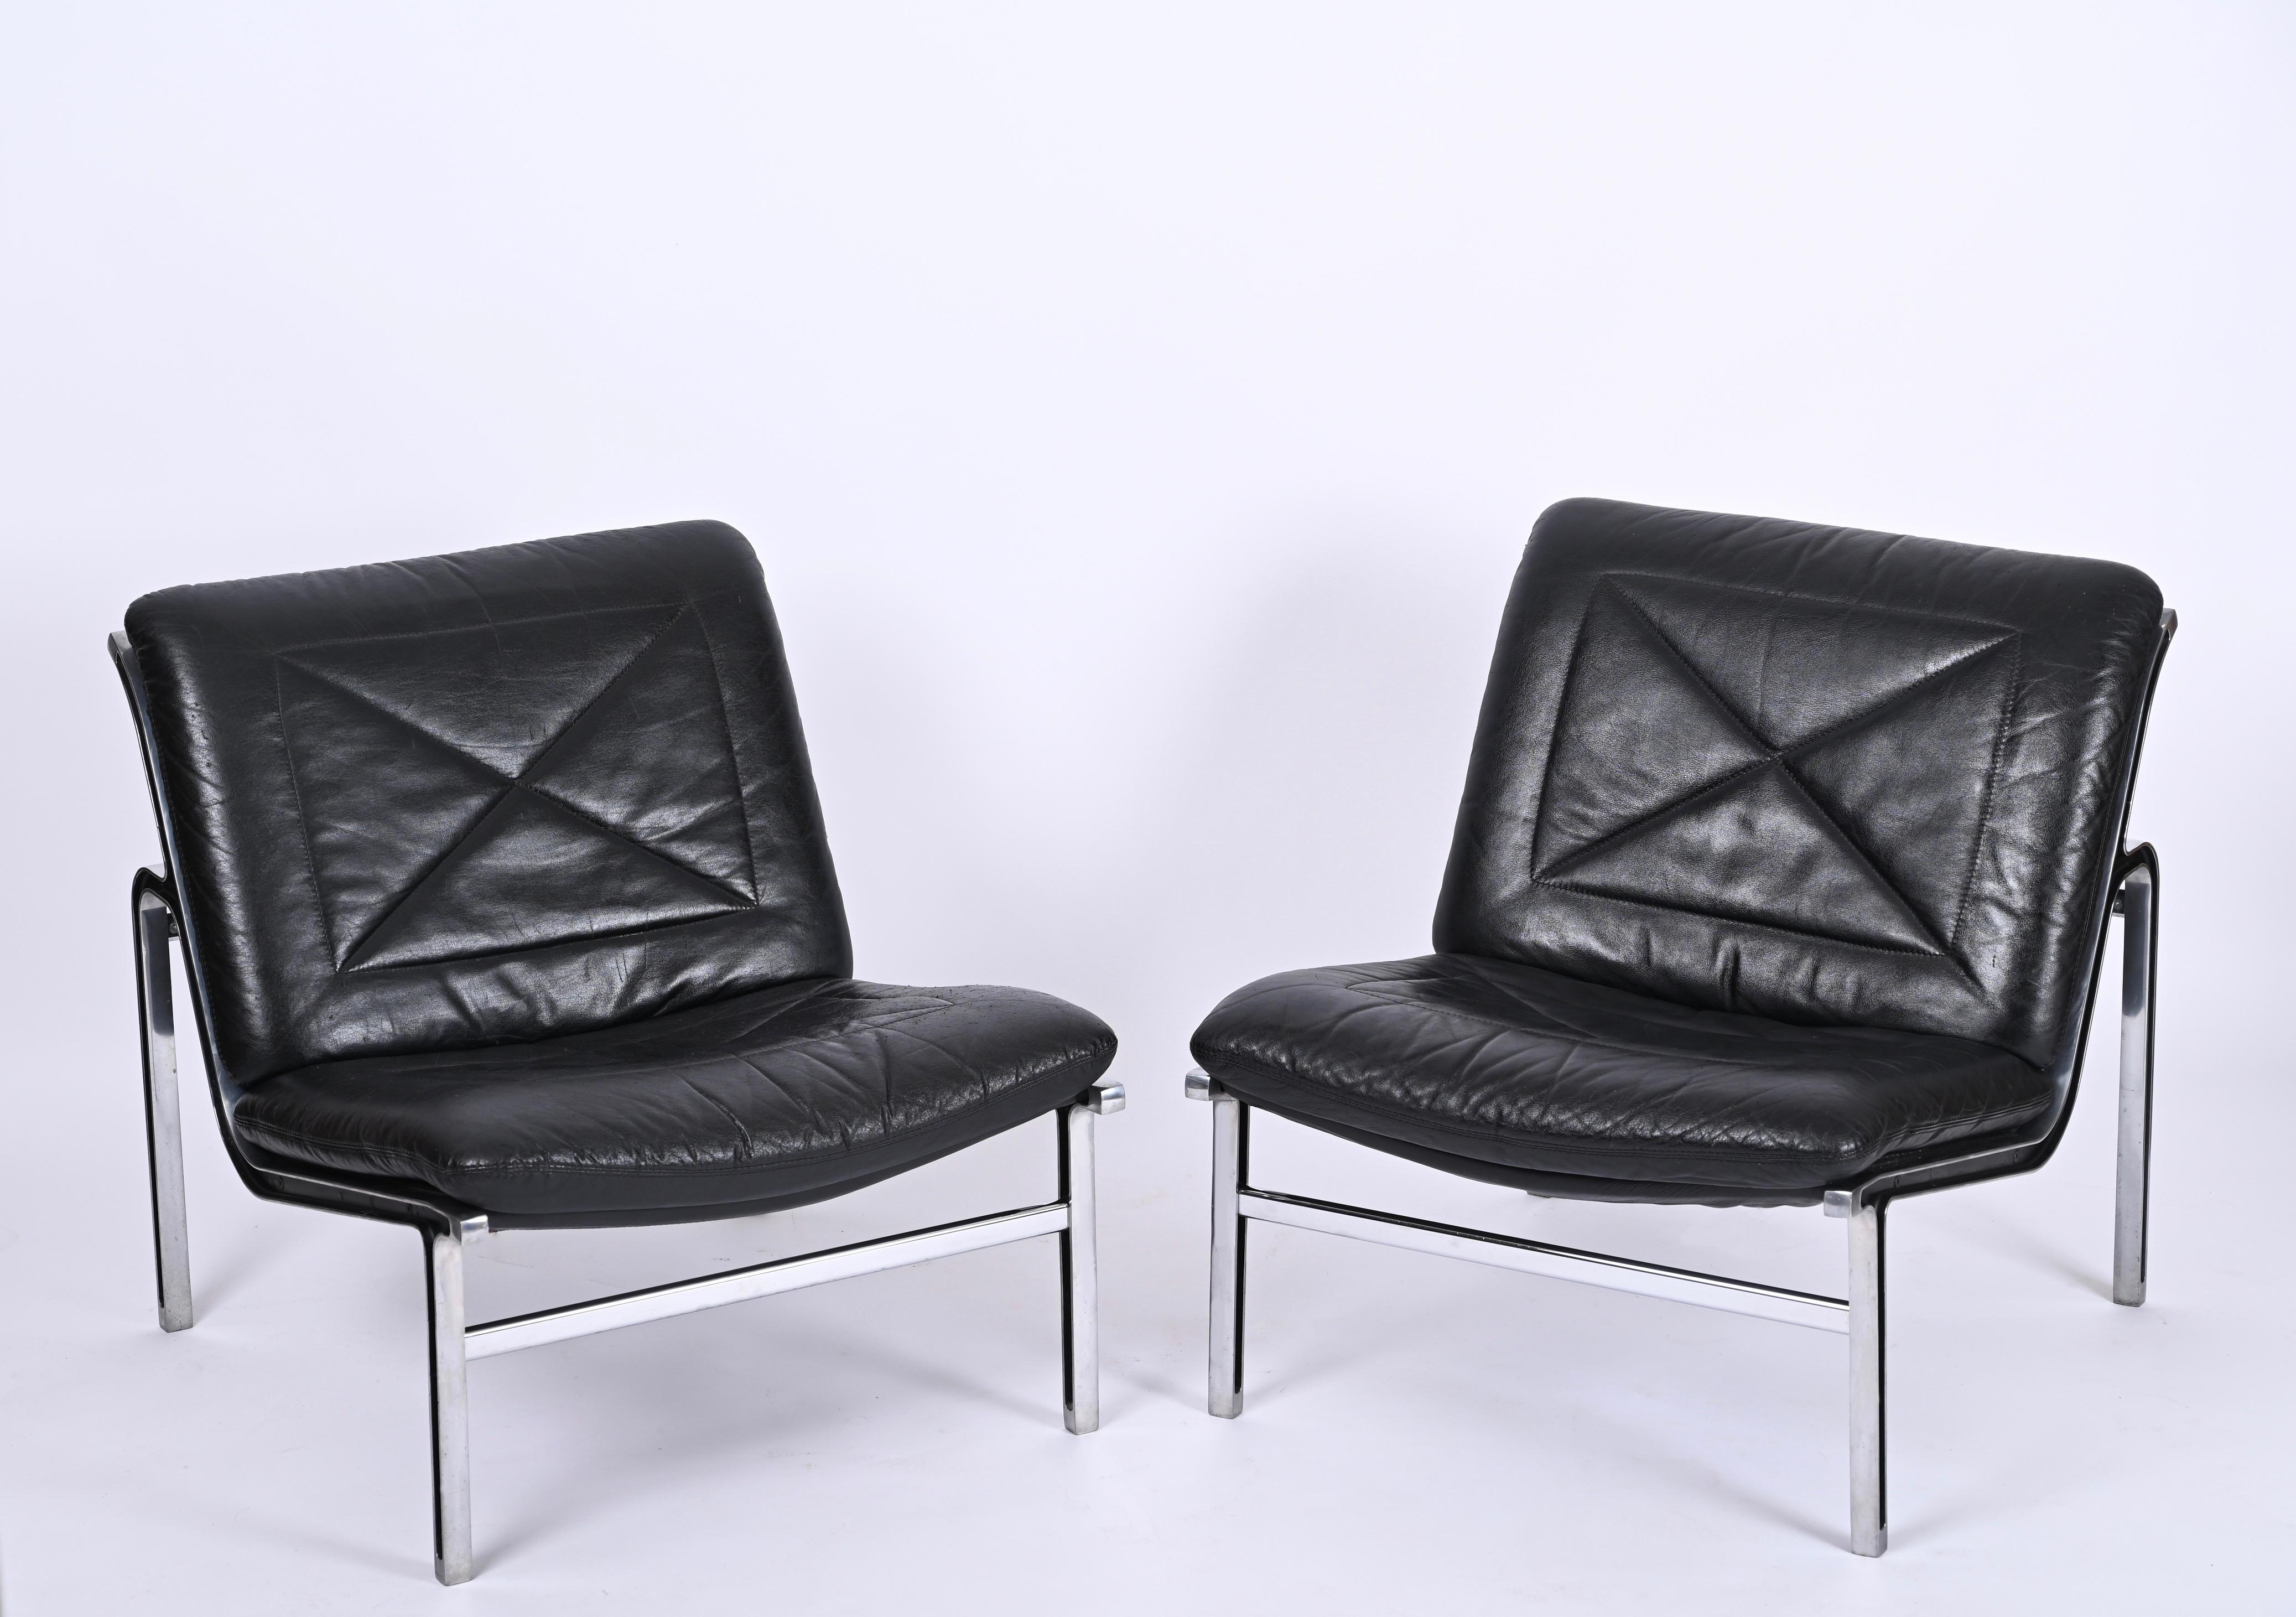 Andre Vandenbeuck Pair of 'Aluline' Lounge Chairs in Black Leather, Swiss, 1960s For Sale 5